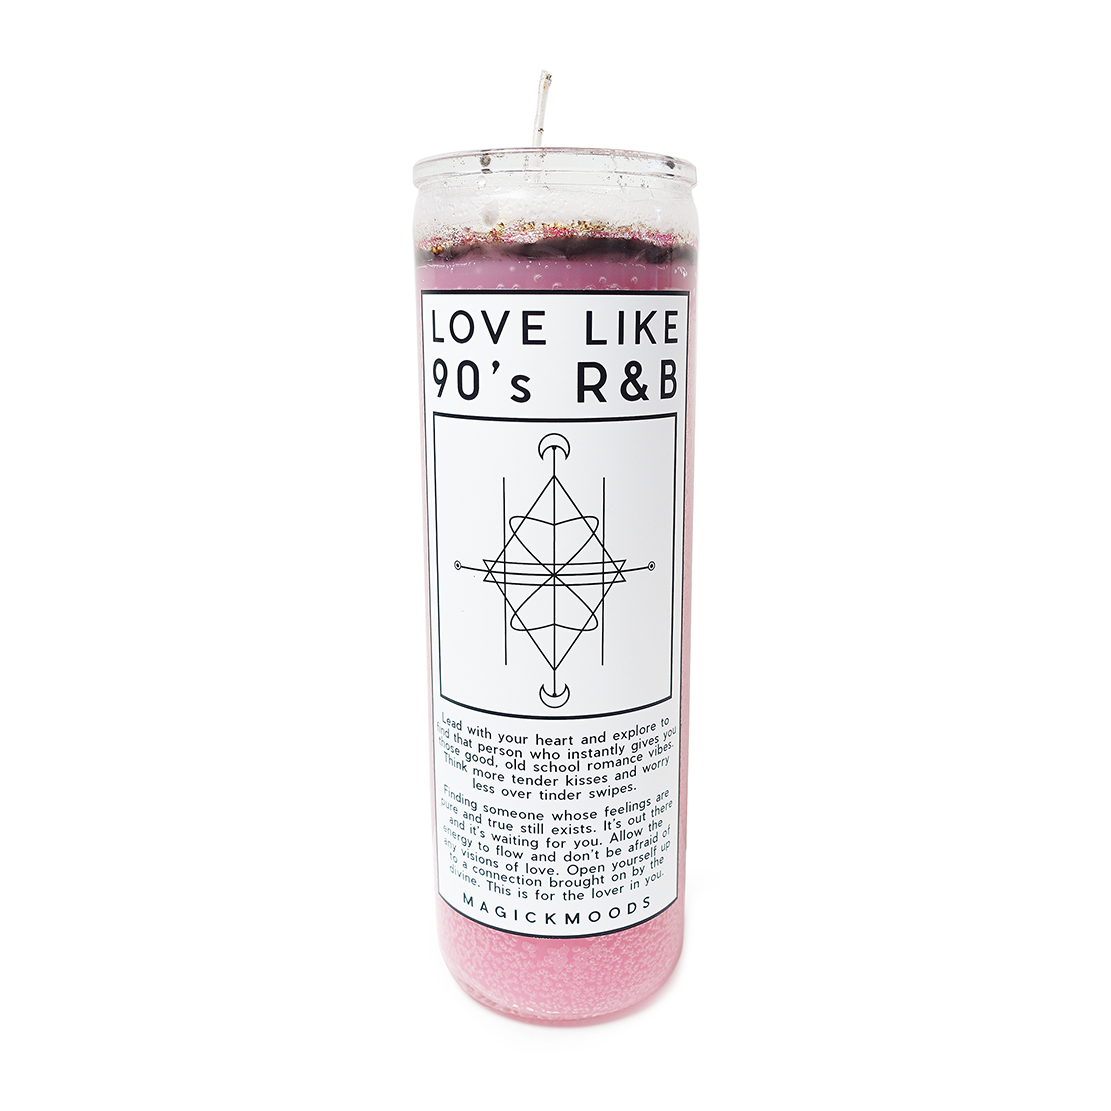 Love Like 90's R&B 7-Day Meditation Candle - PREORDER - Ships by July 28th, 2023